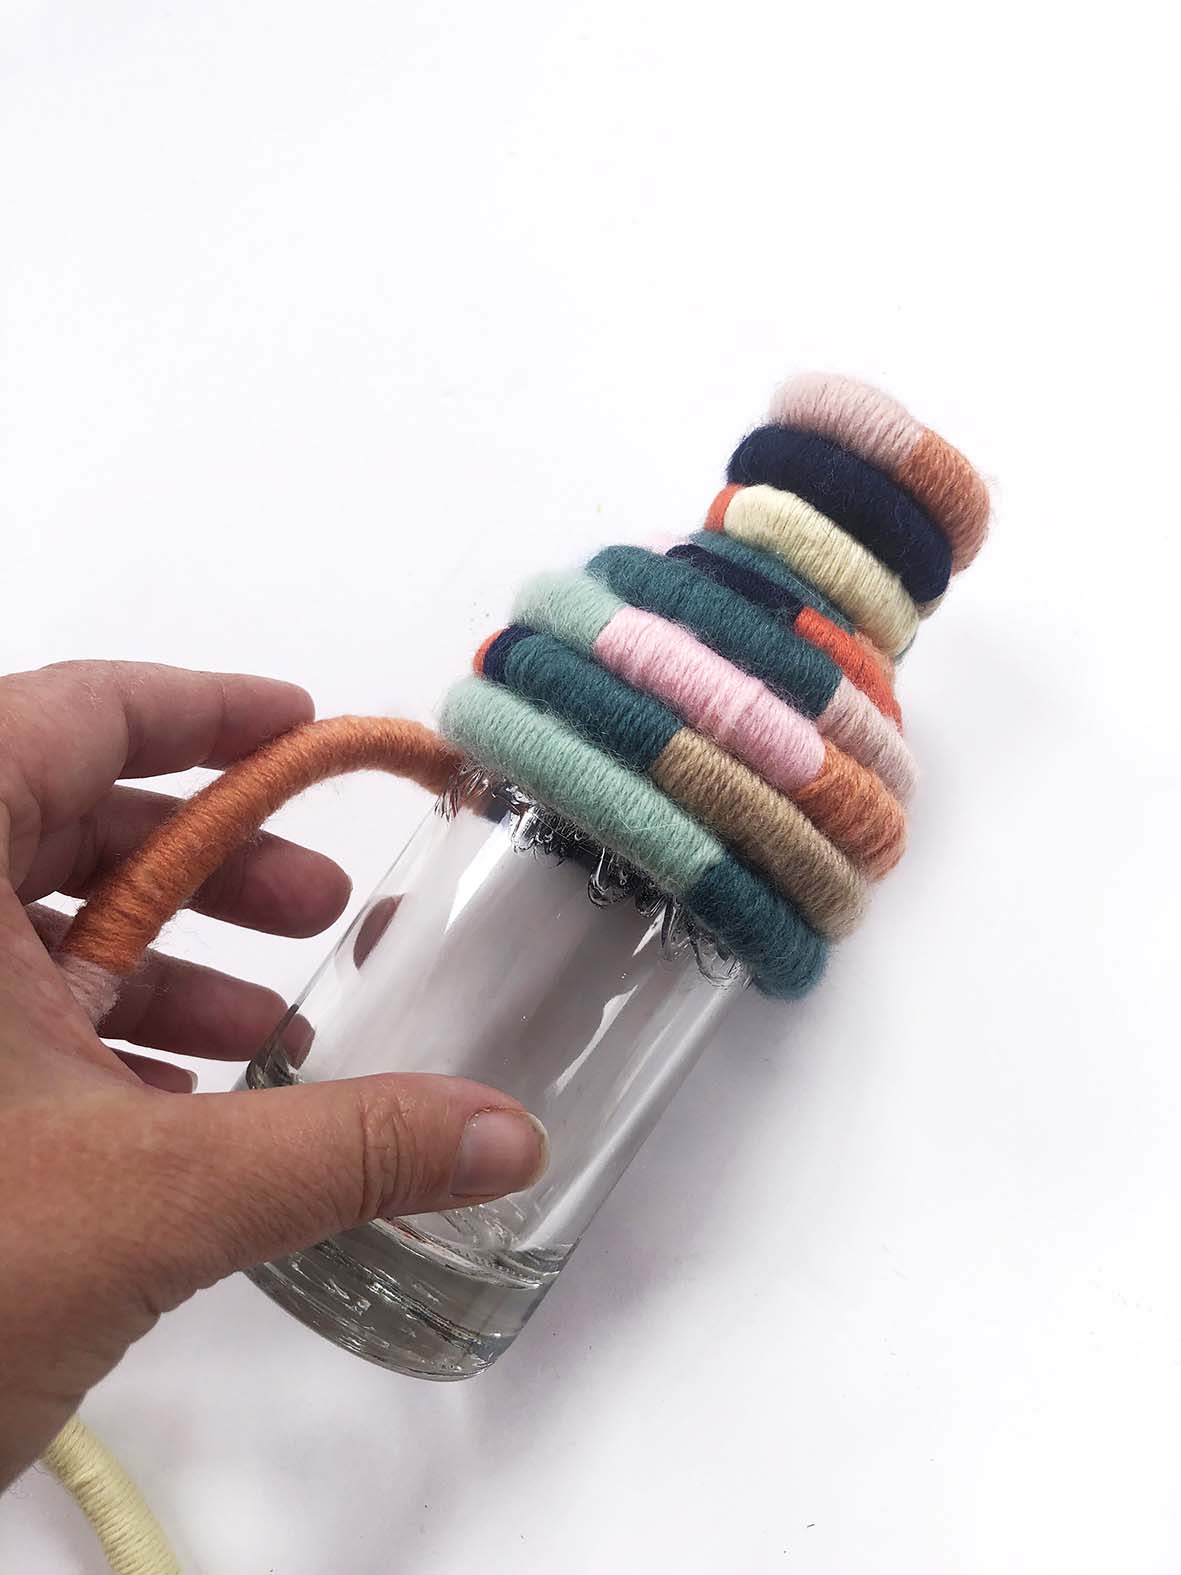 A bottle wrapped in rainbow cord